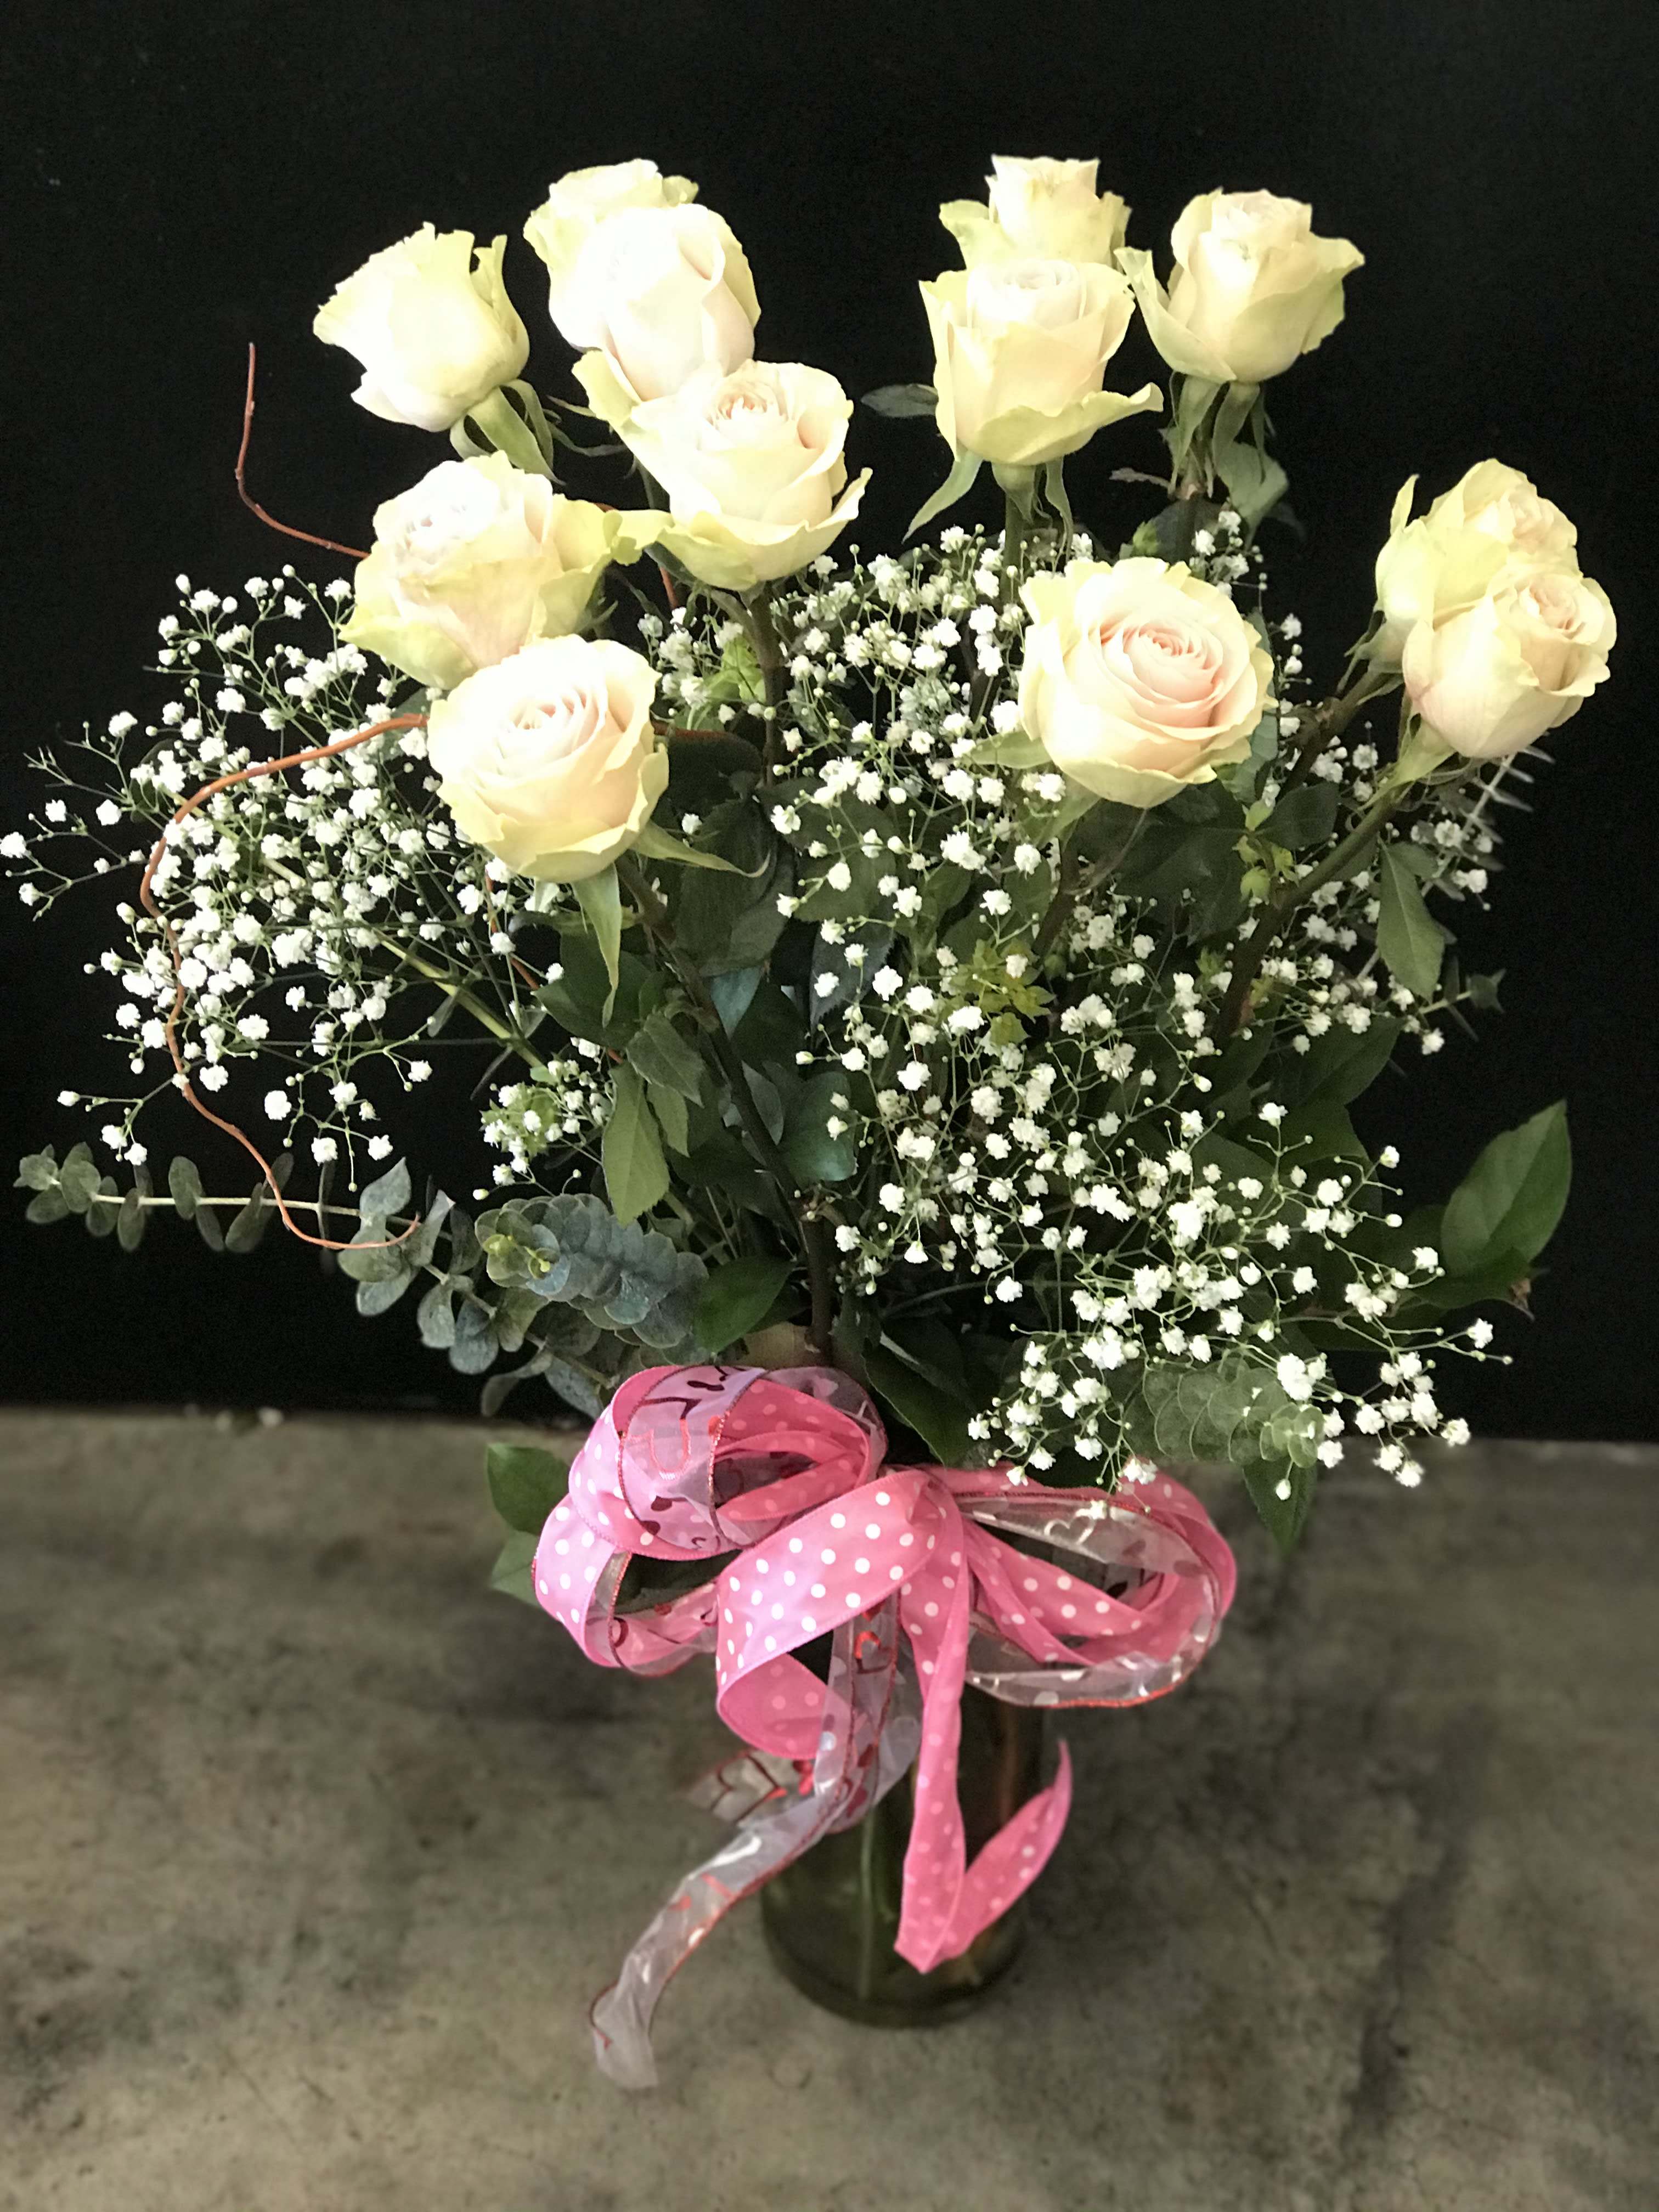 Light Pink Dozen - 12 Light Pink Roses in a vase with greens &amp; Babies breath